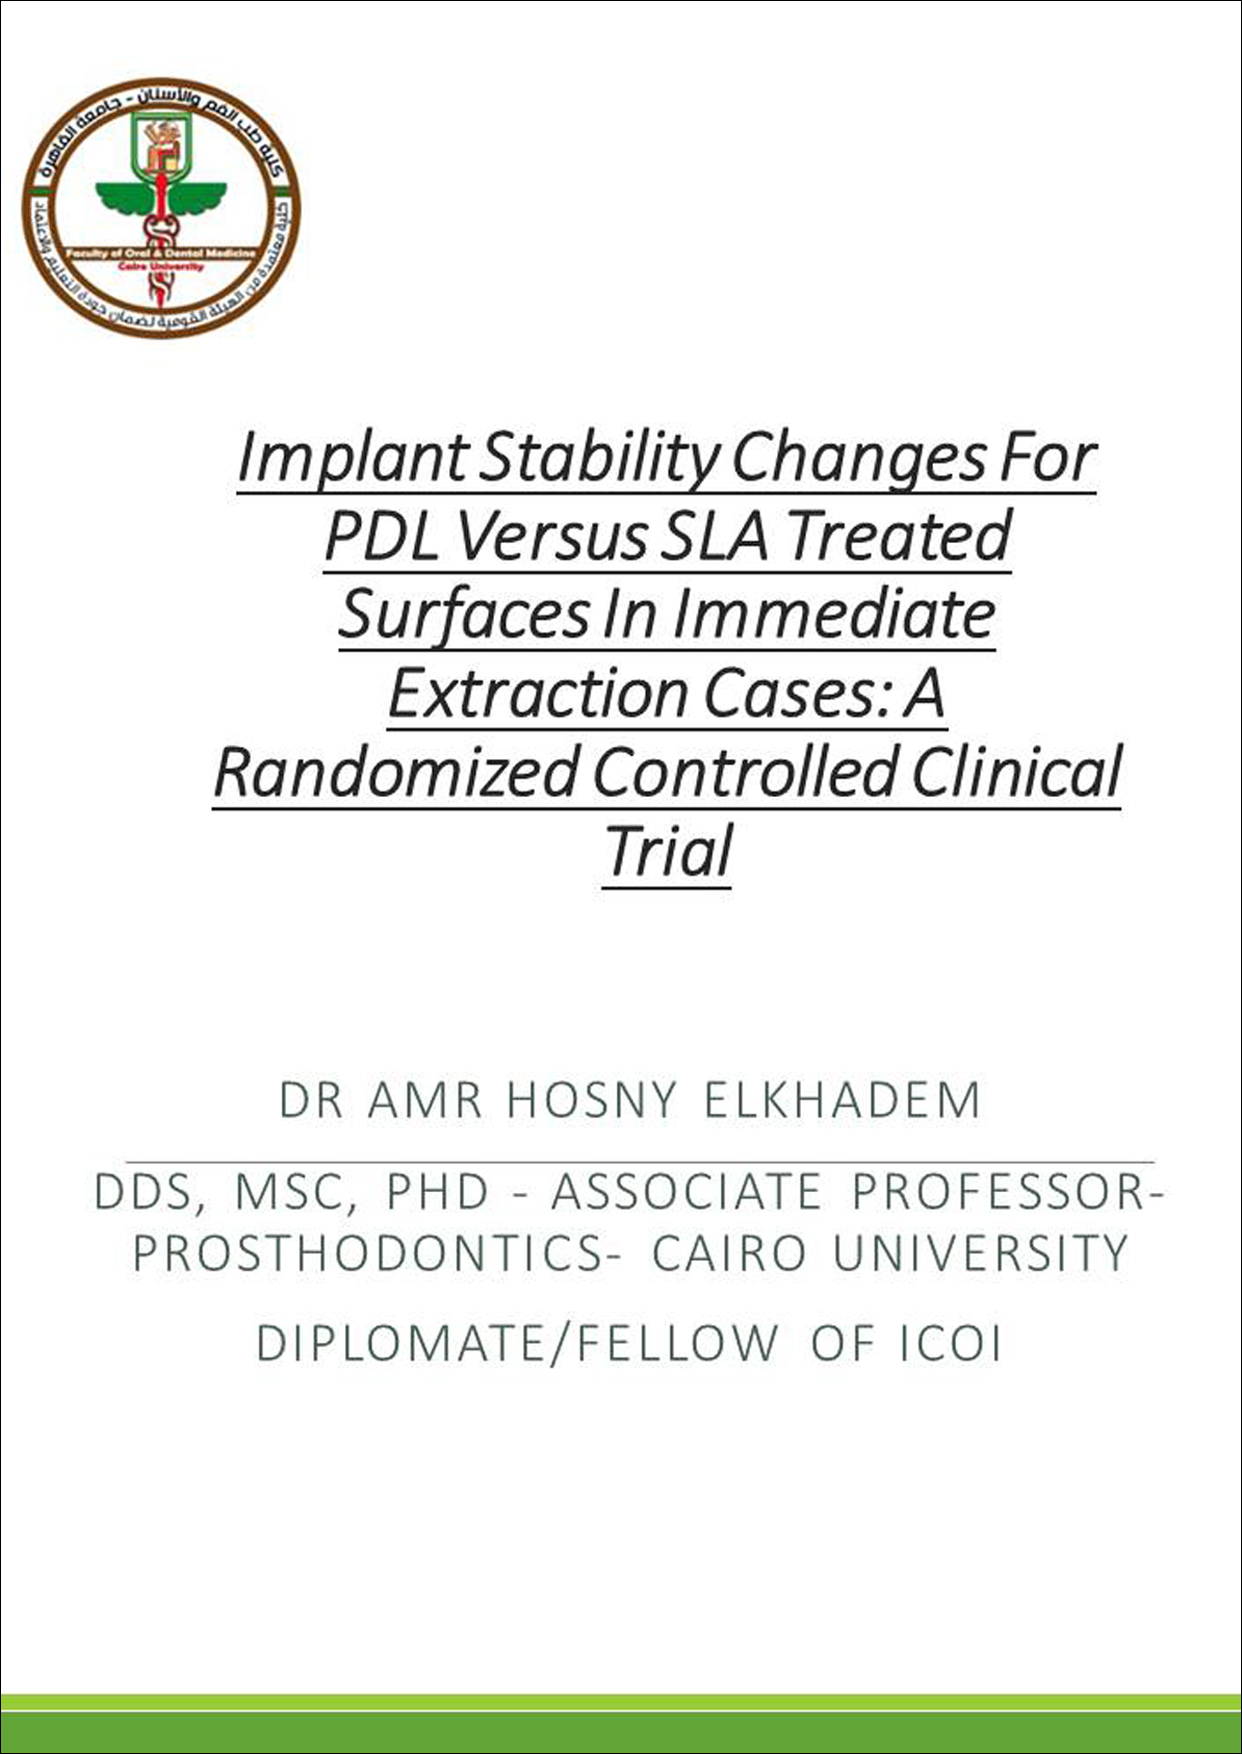 Implant Stability Changes For PDL Versus SLA Treated Surfaces In Immediate Extraction Cases: A Randomized Controlled Clinical Trial